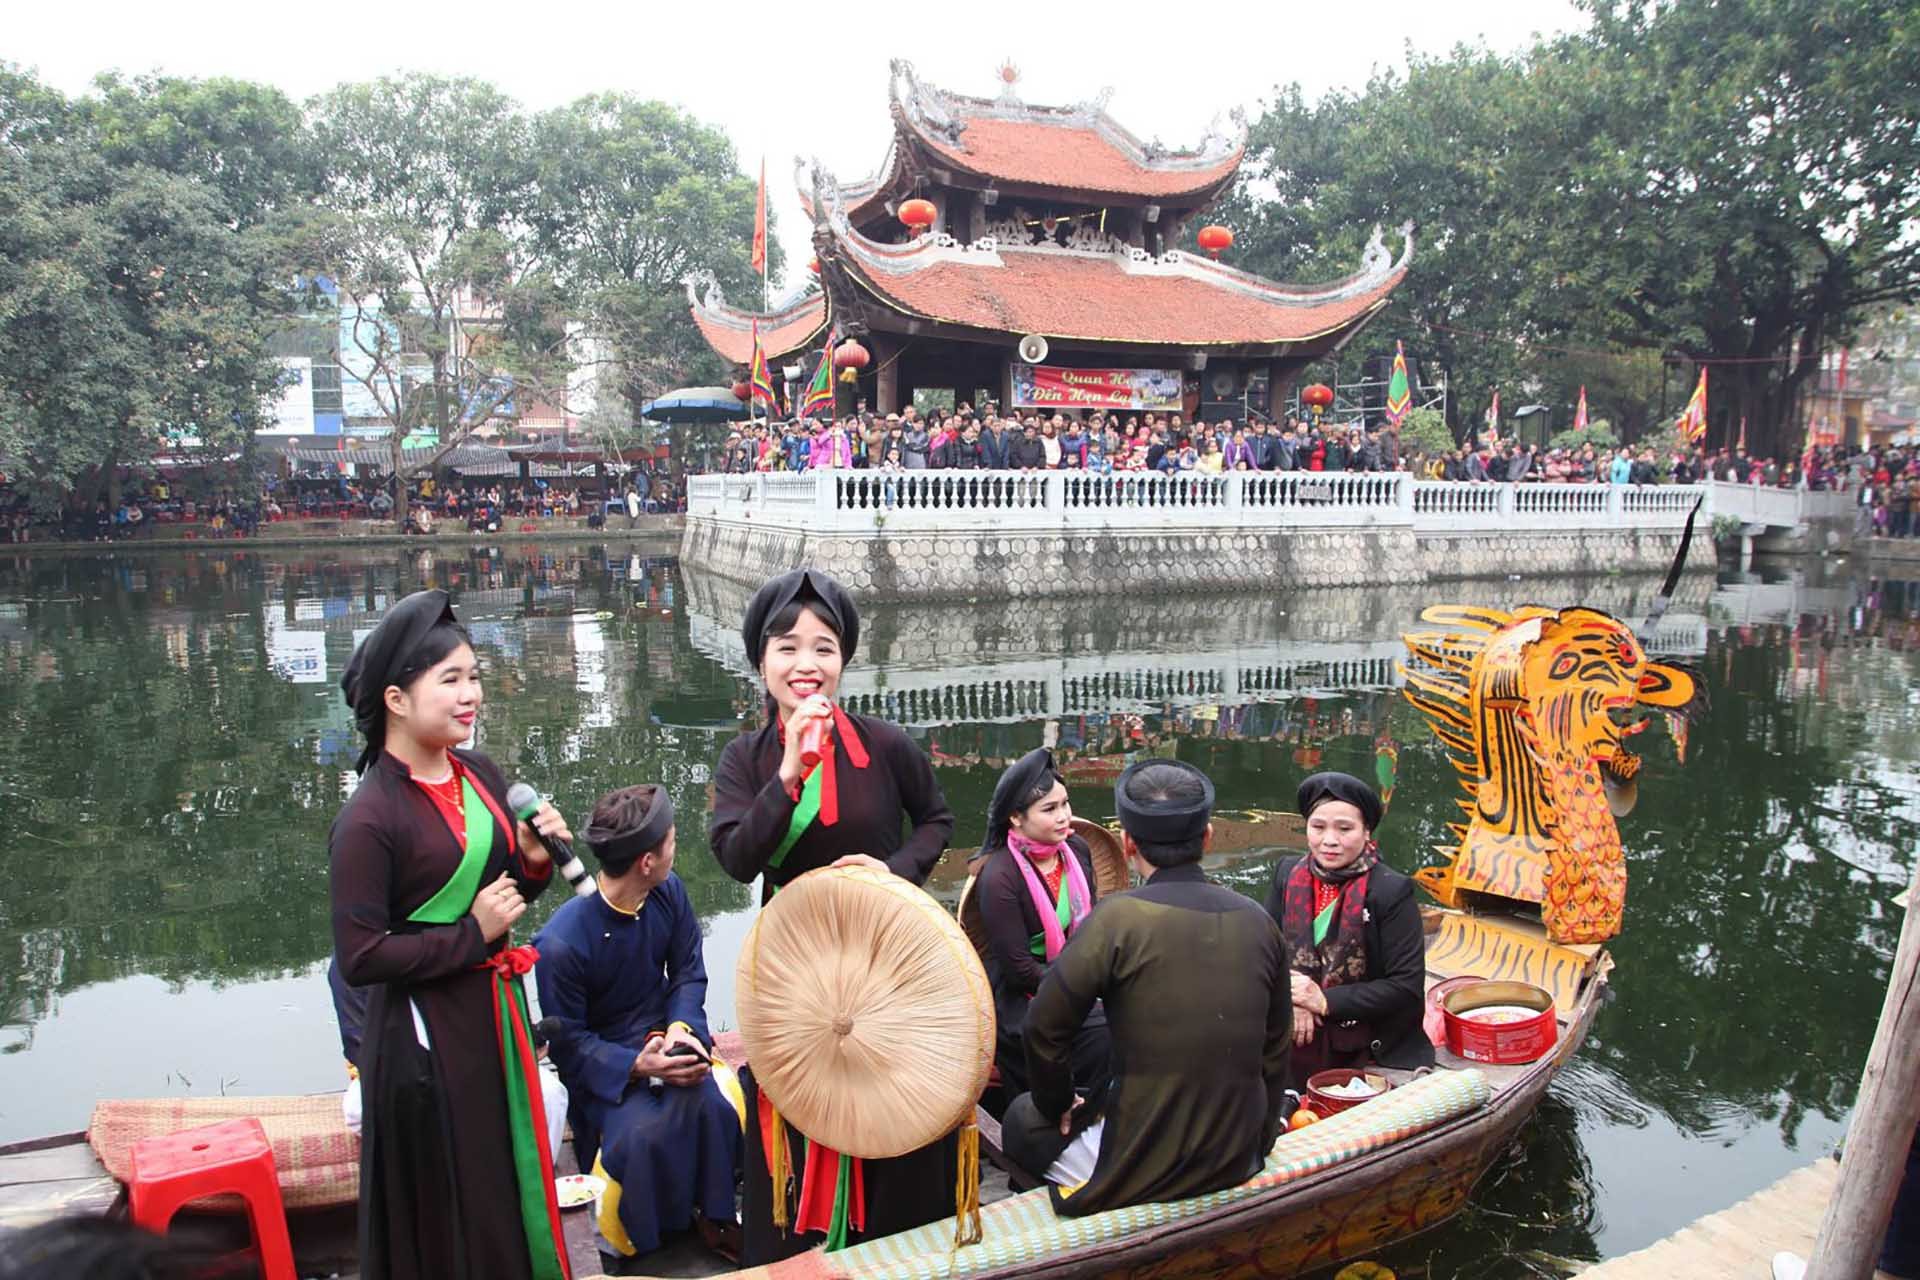 lien anh and lien chi in a Lim Festival in Bac Ninh